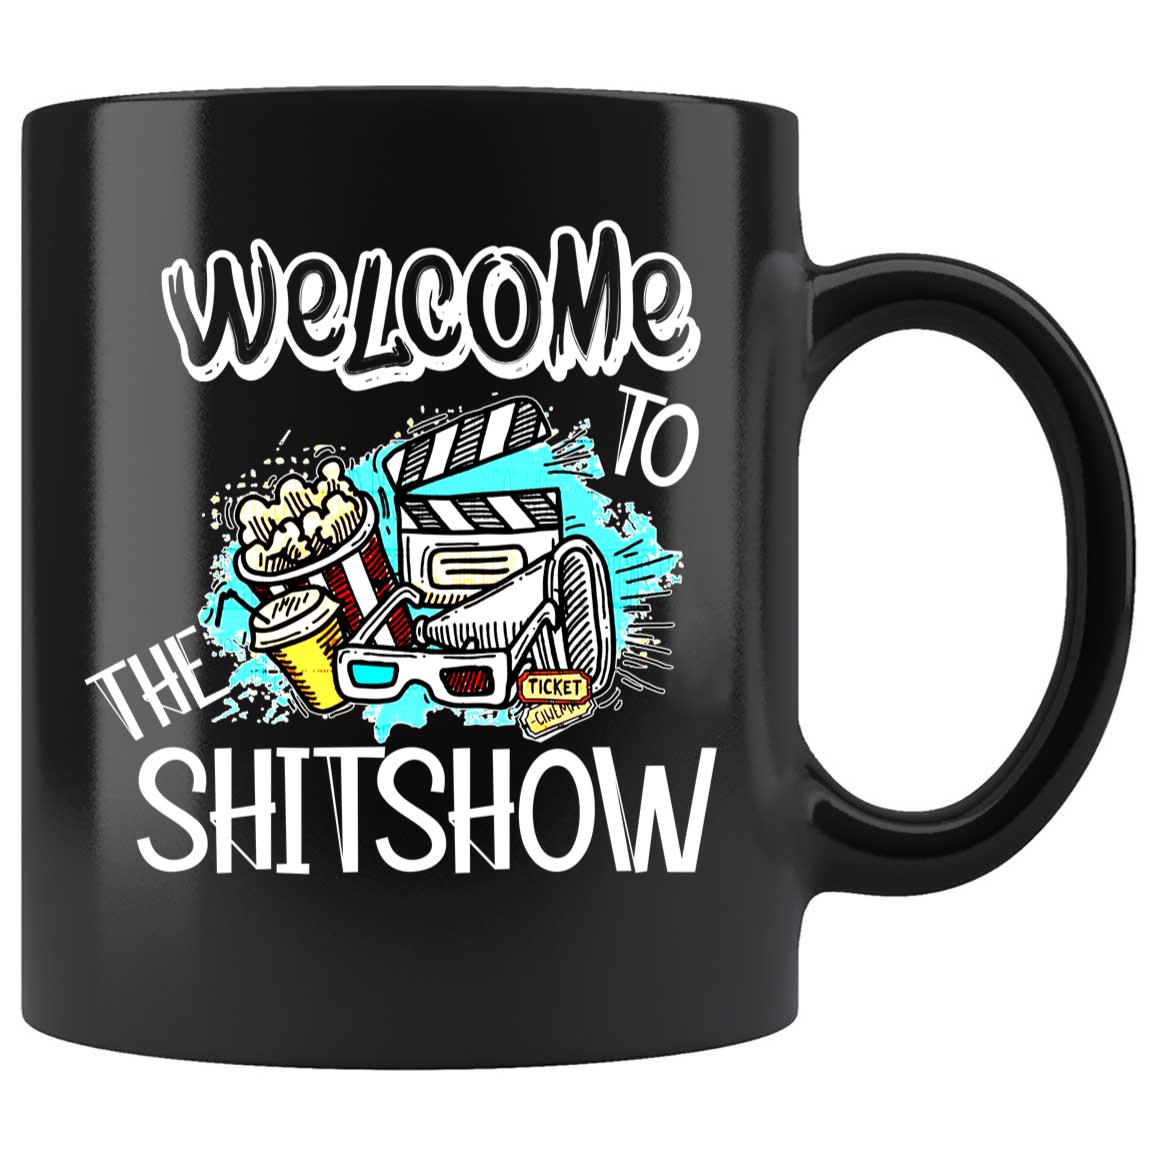 Skitongifts Coffee Mug Funny Ceramic Novelty Welcome To The Shitshow Kd55yhr